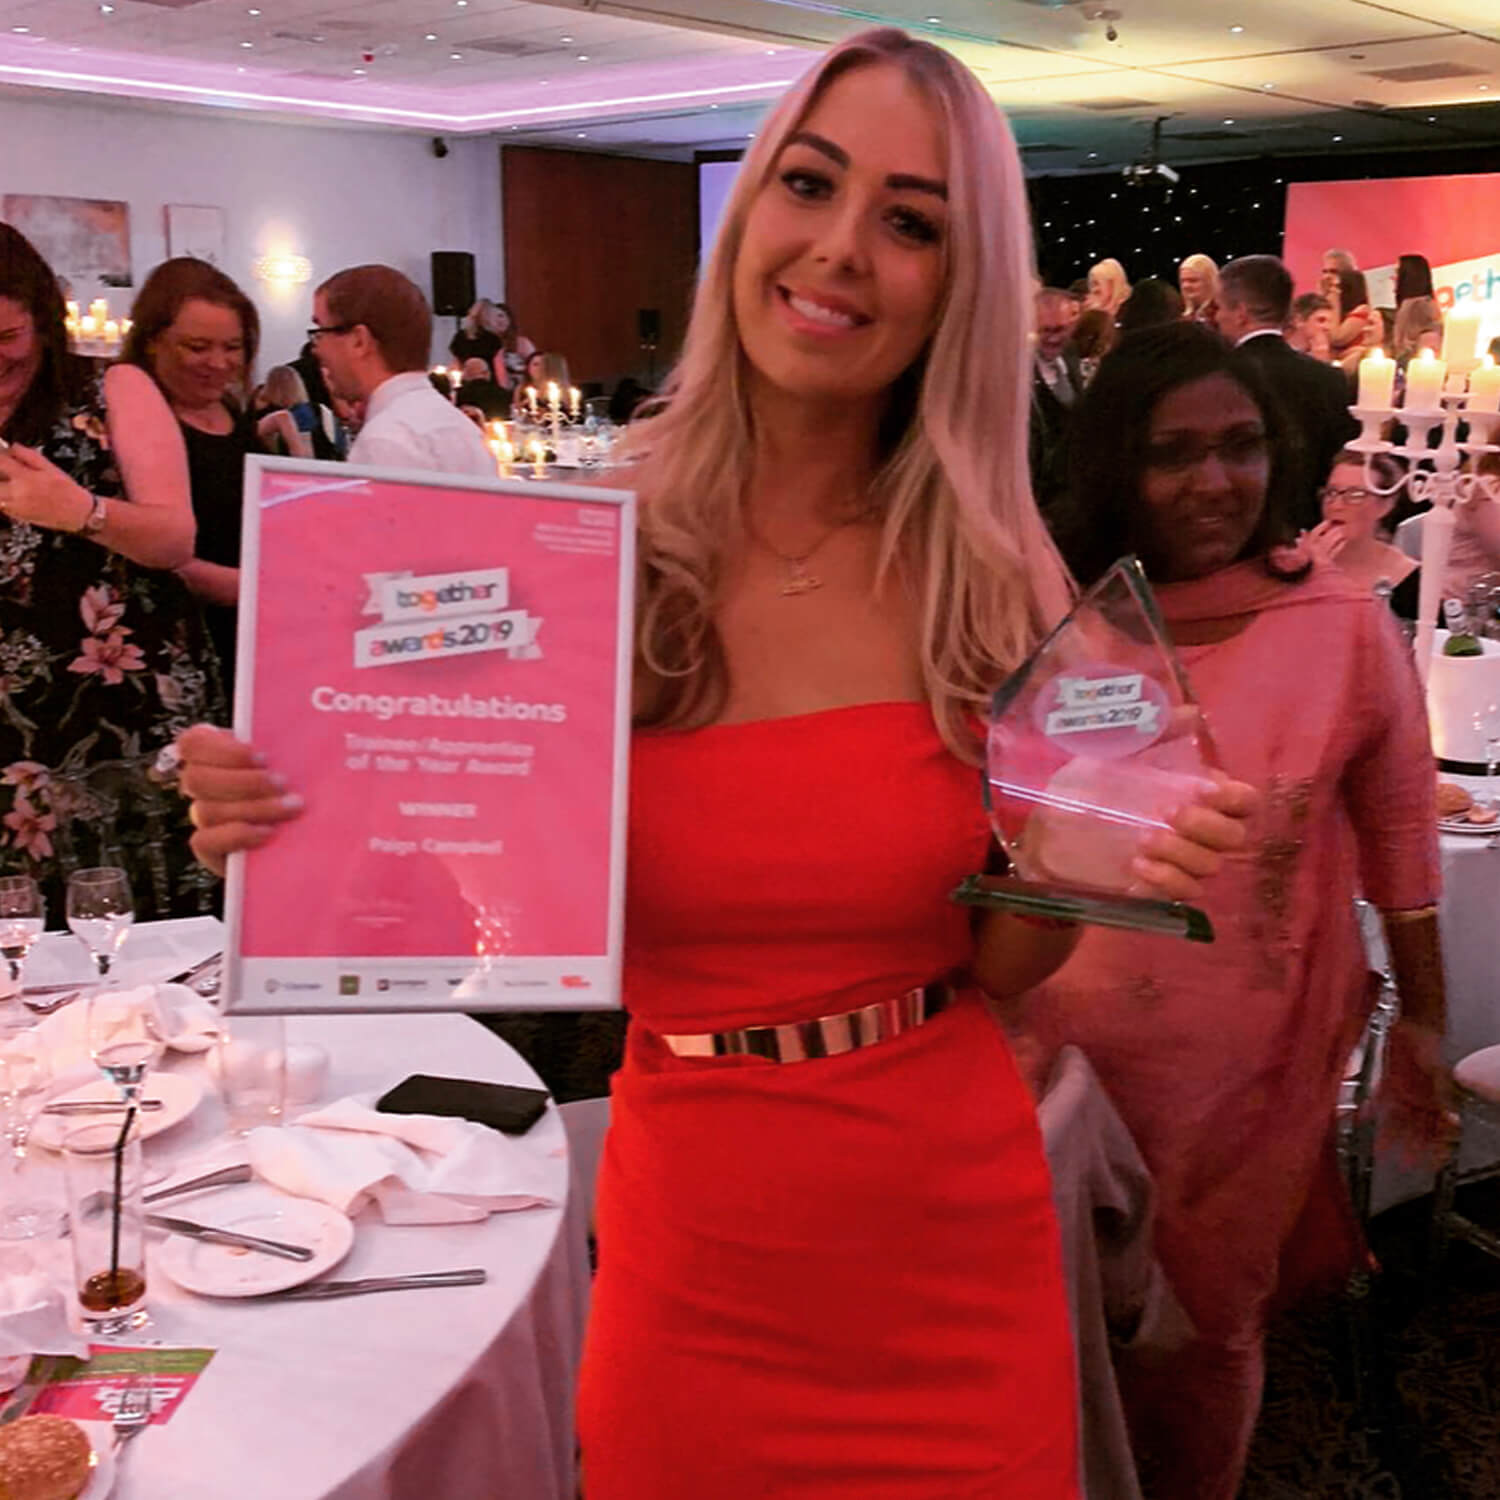 Wirral Met Case Study Paige Campbell holding the Trainee/Apprentice of the Year Award during the Wirral University Teaching Hospital Annual Staff Awards